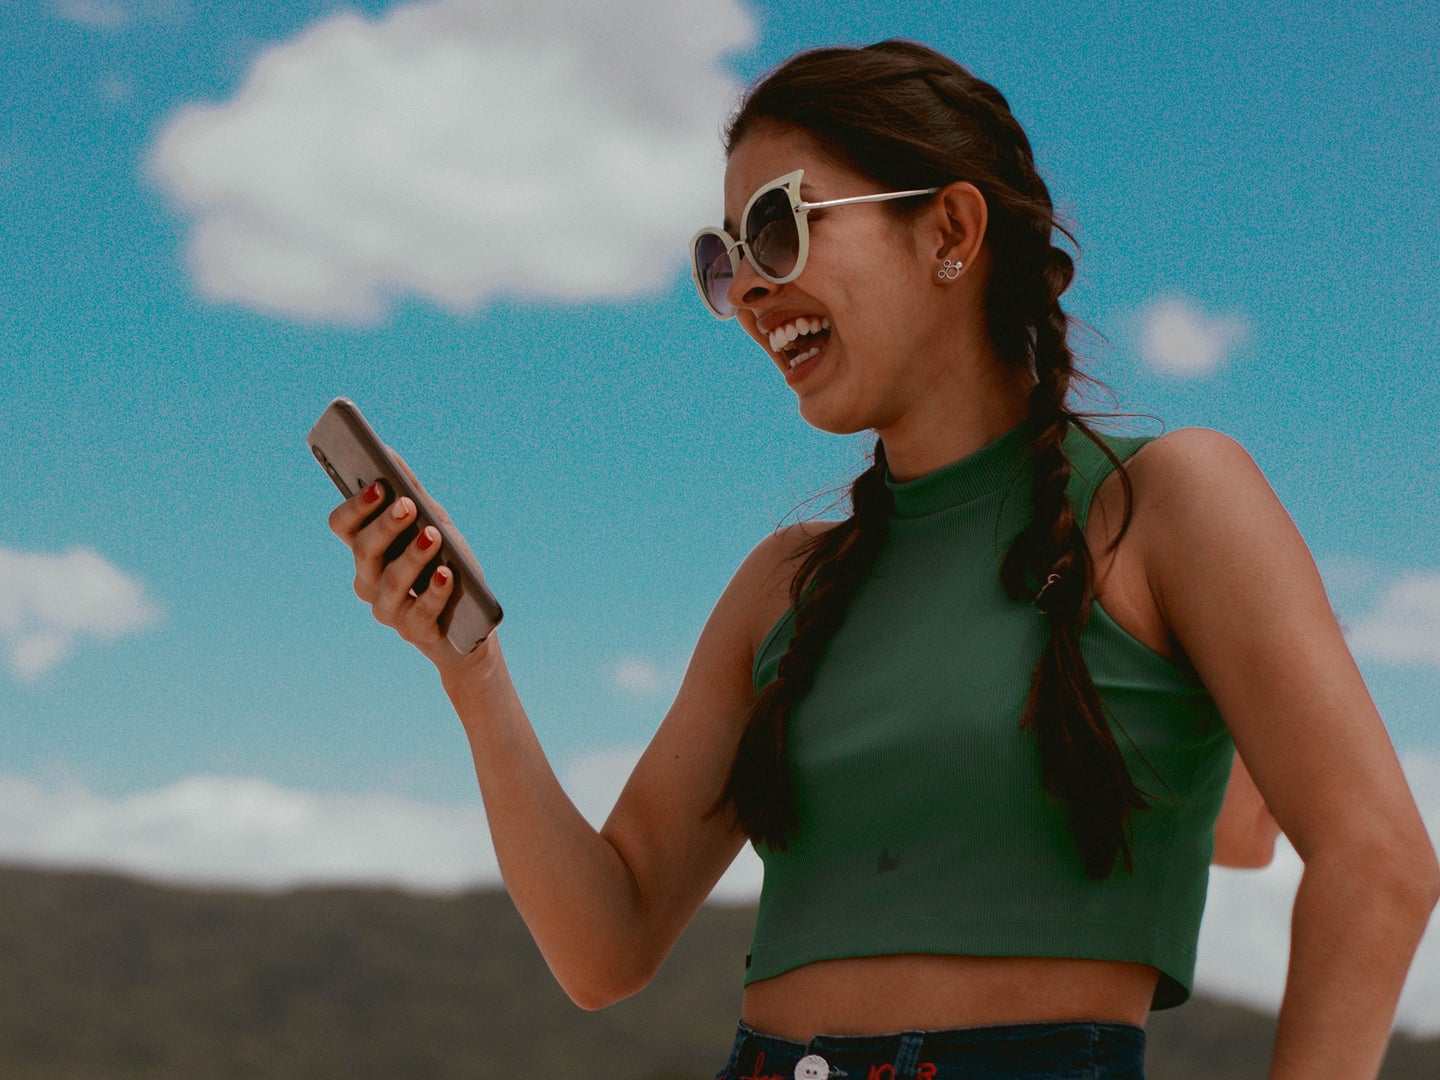 A woman with pigtails wearing sunglasses, holding a phone, and laughing under a blue sky.